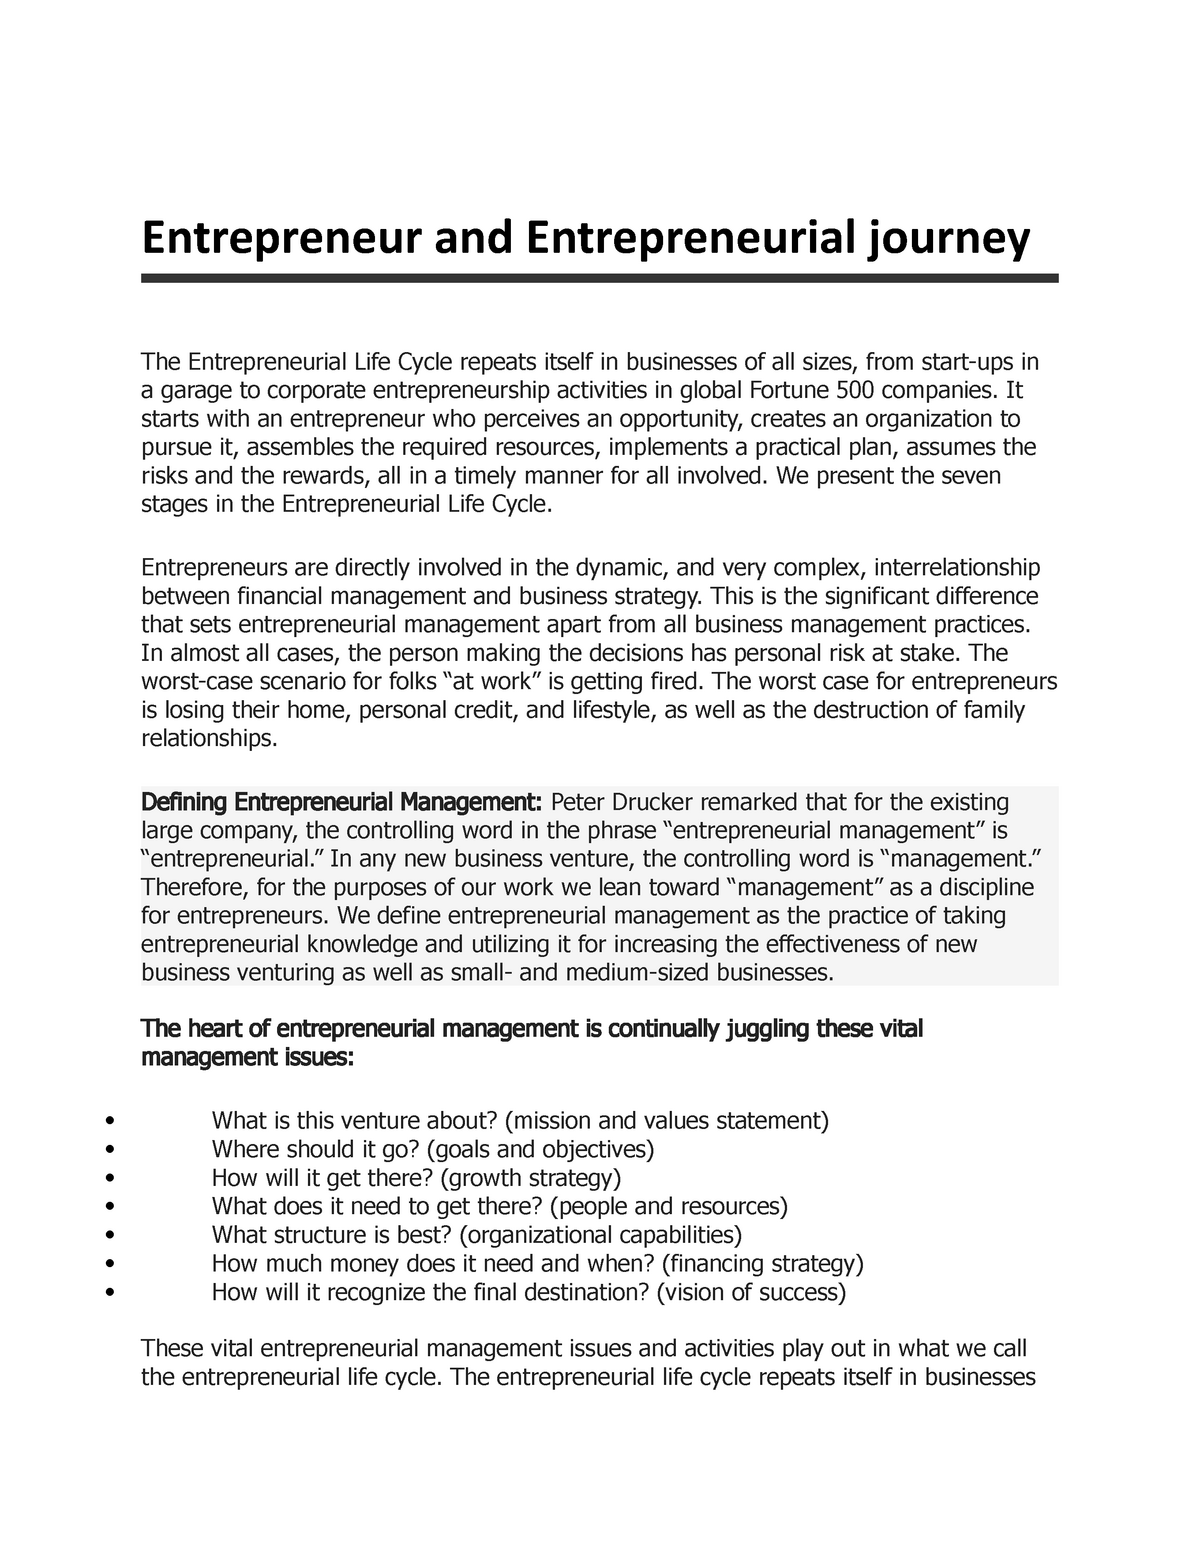 entrepreneurship assignment for mba students